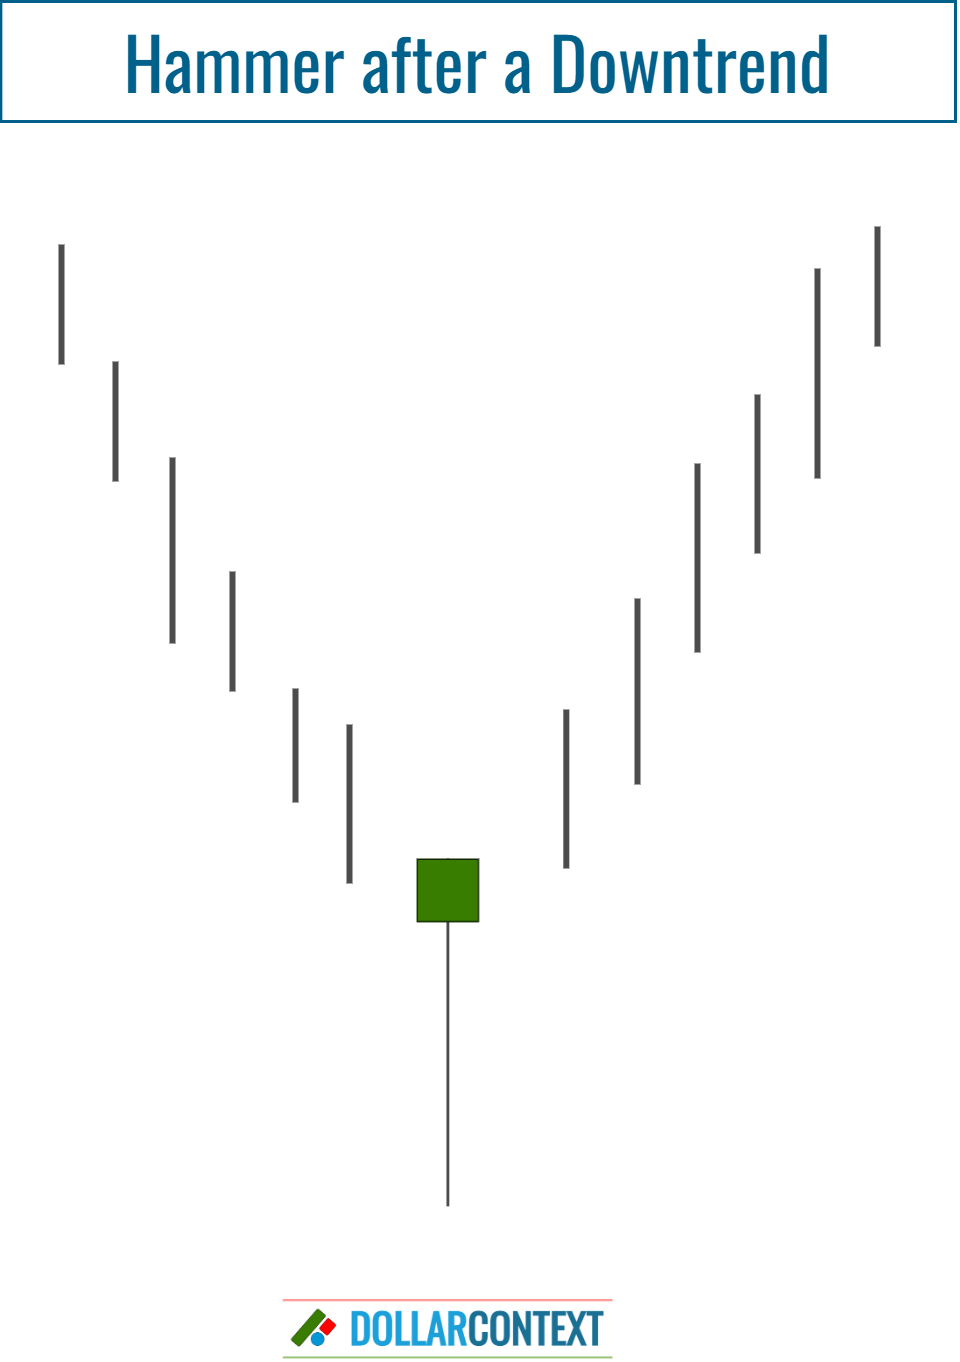 Hammer After a Mature or Steep Downtrend